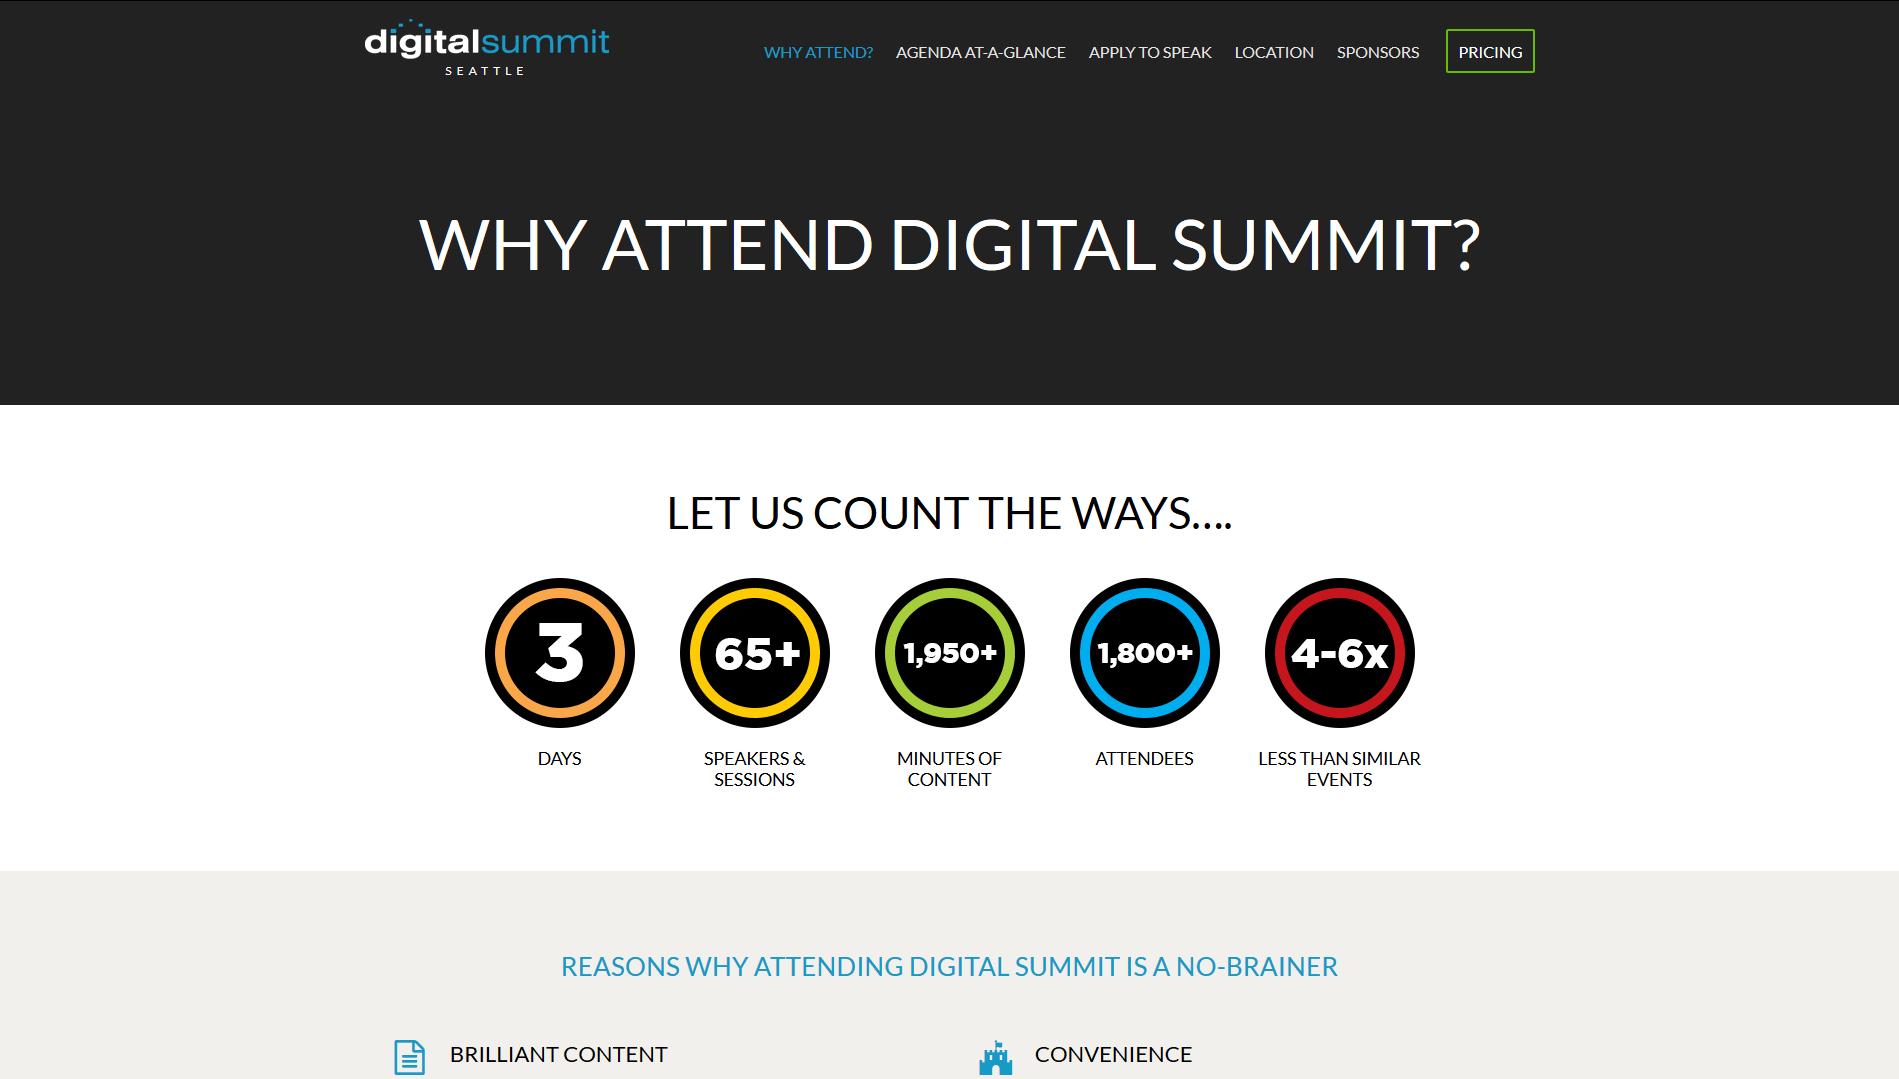 Digital Summit Seattle has more than 60 speakers and 2000 minutes of content